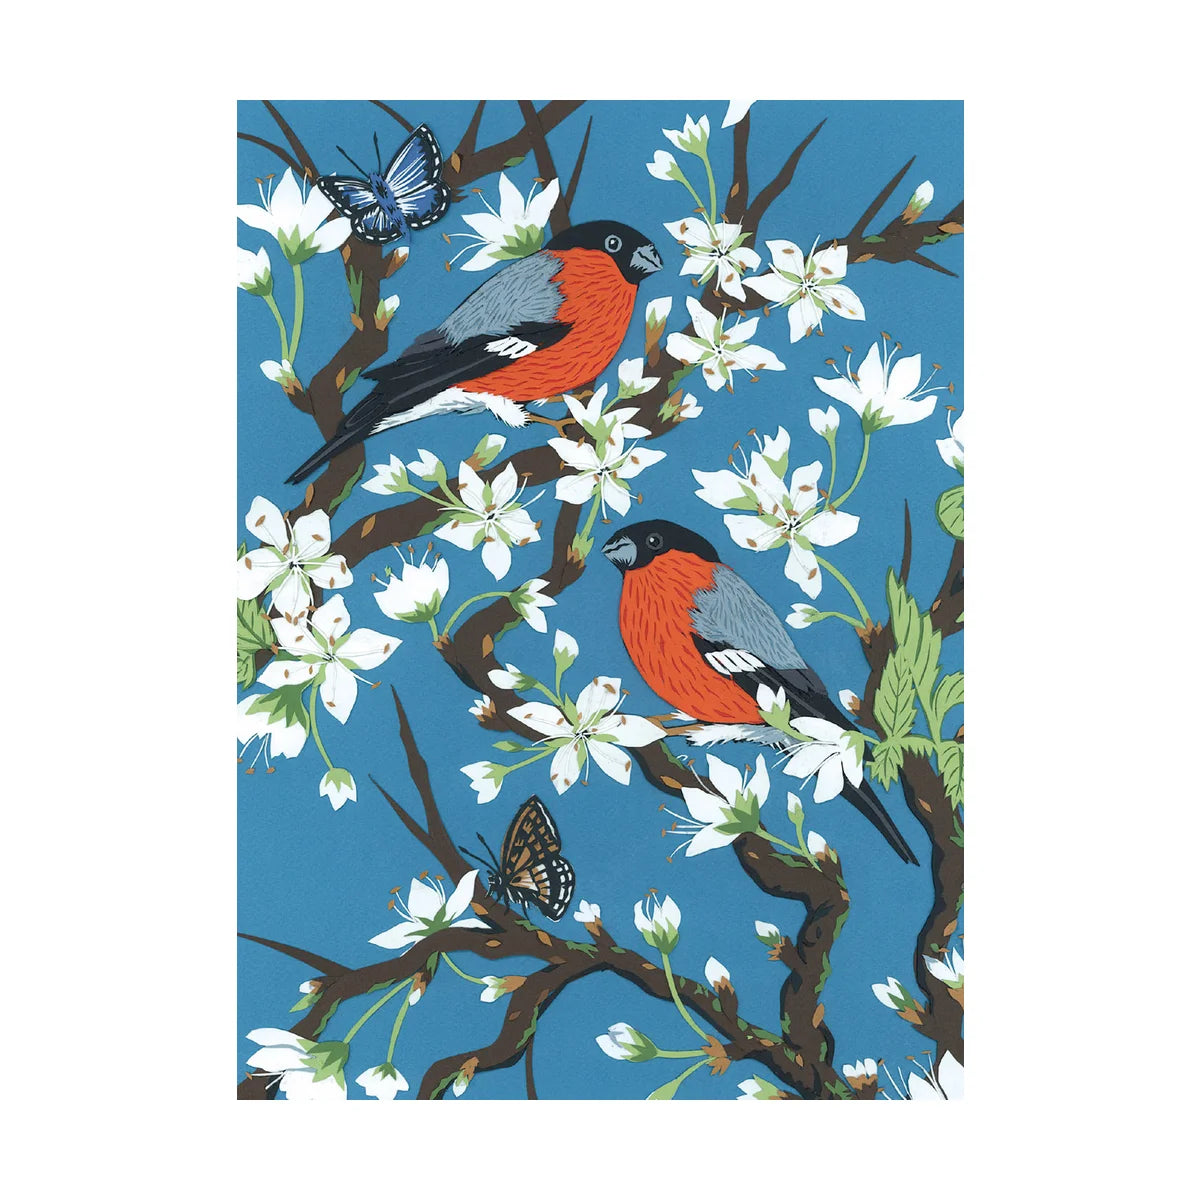 Bullfinches On Blossom Museums & Galleries Card